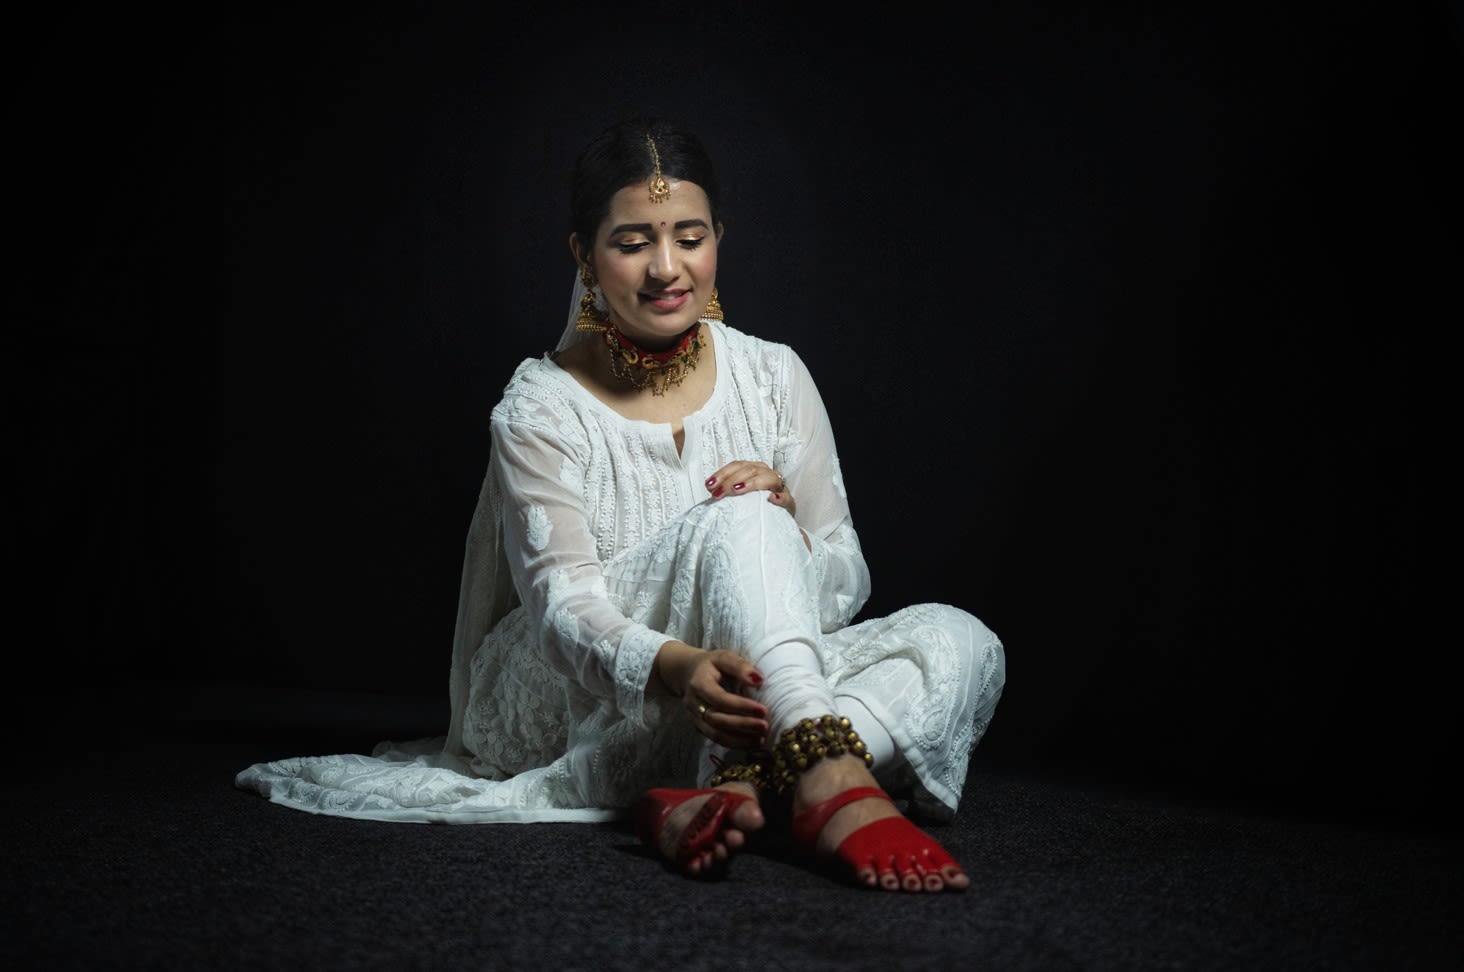 Graduate student Aditi Sarna sitting down wearing her footwear design and white traditional dress with a black background